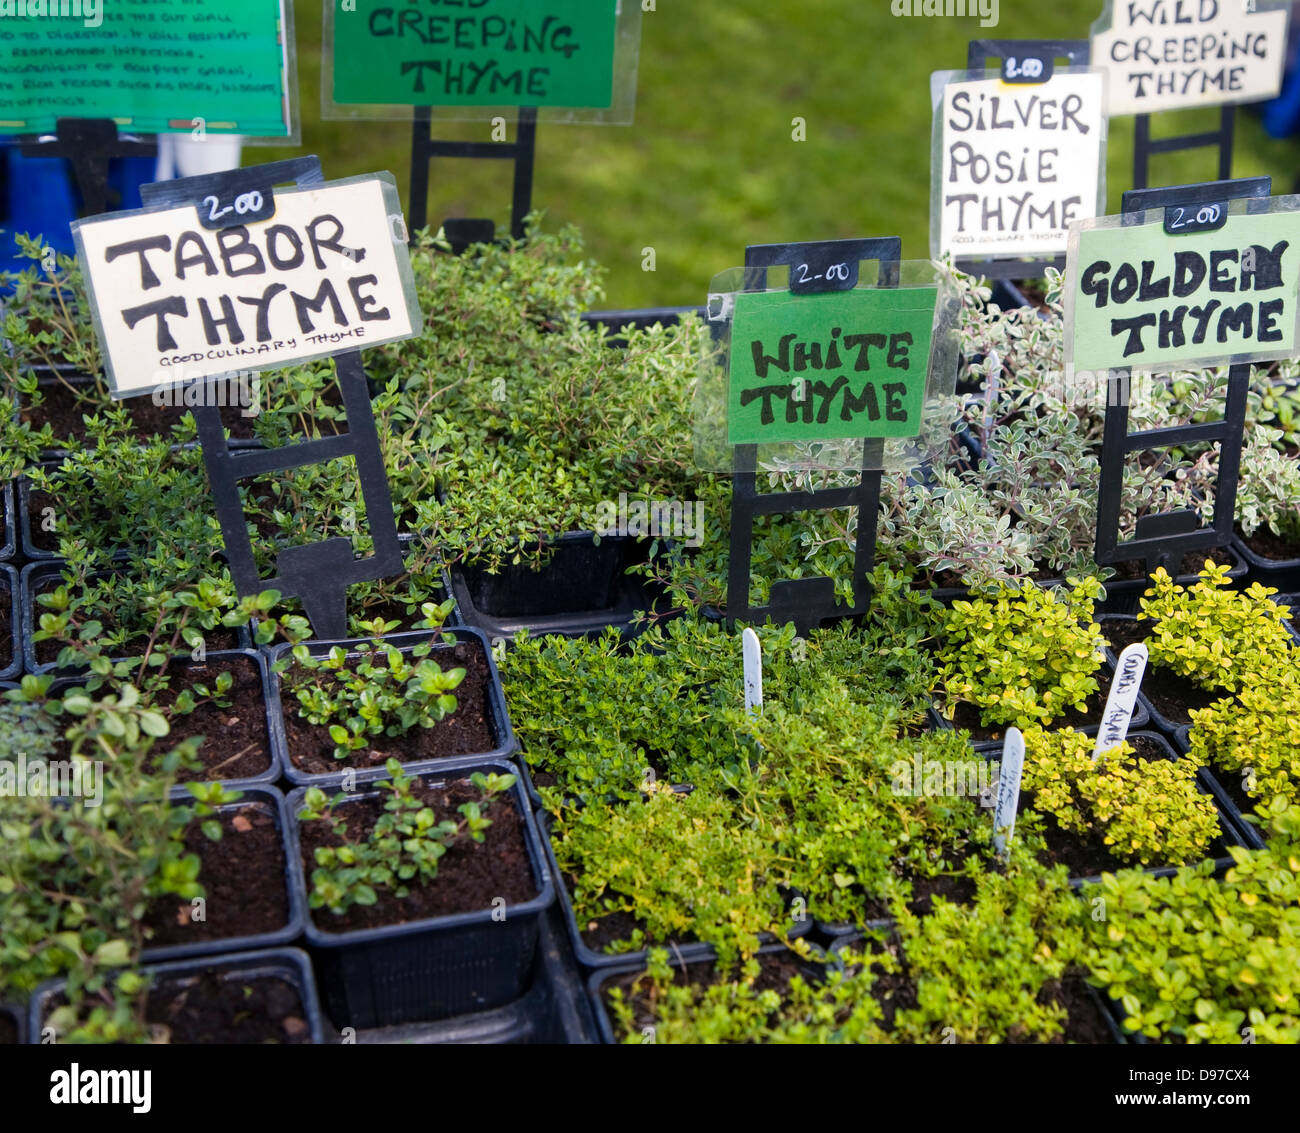 Herb plants with labels for sale during garden event at Helmingham Hall, Suffolk, England Stock Photo